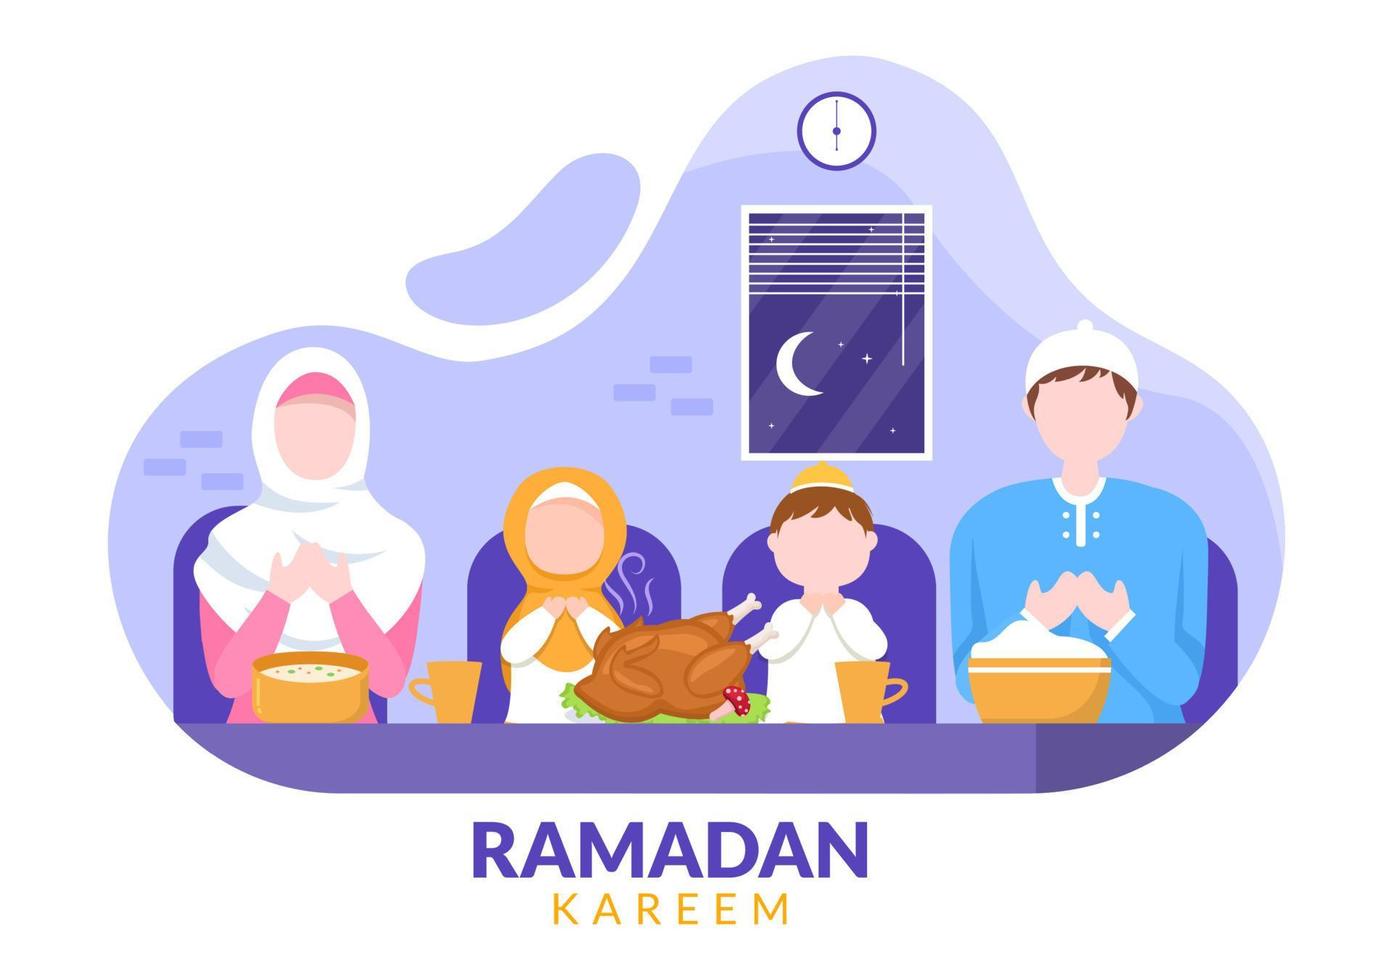 Ramadan Kareem with Breaking the Fast, Iftar or Sahur in Flat Background Vector Illustration for Religious Holiday Islamic Eid Fitr and Adha Festival Banner or Poster